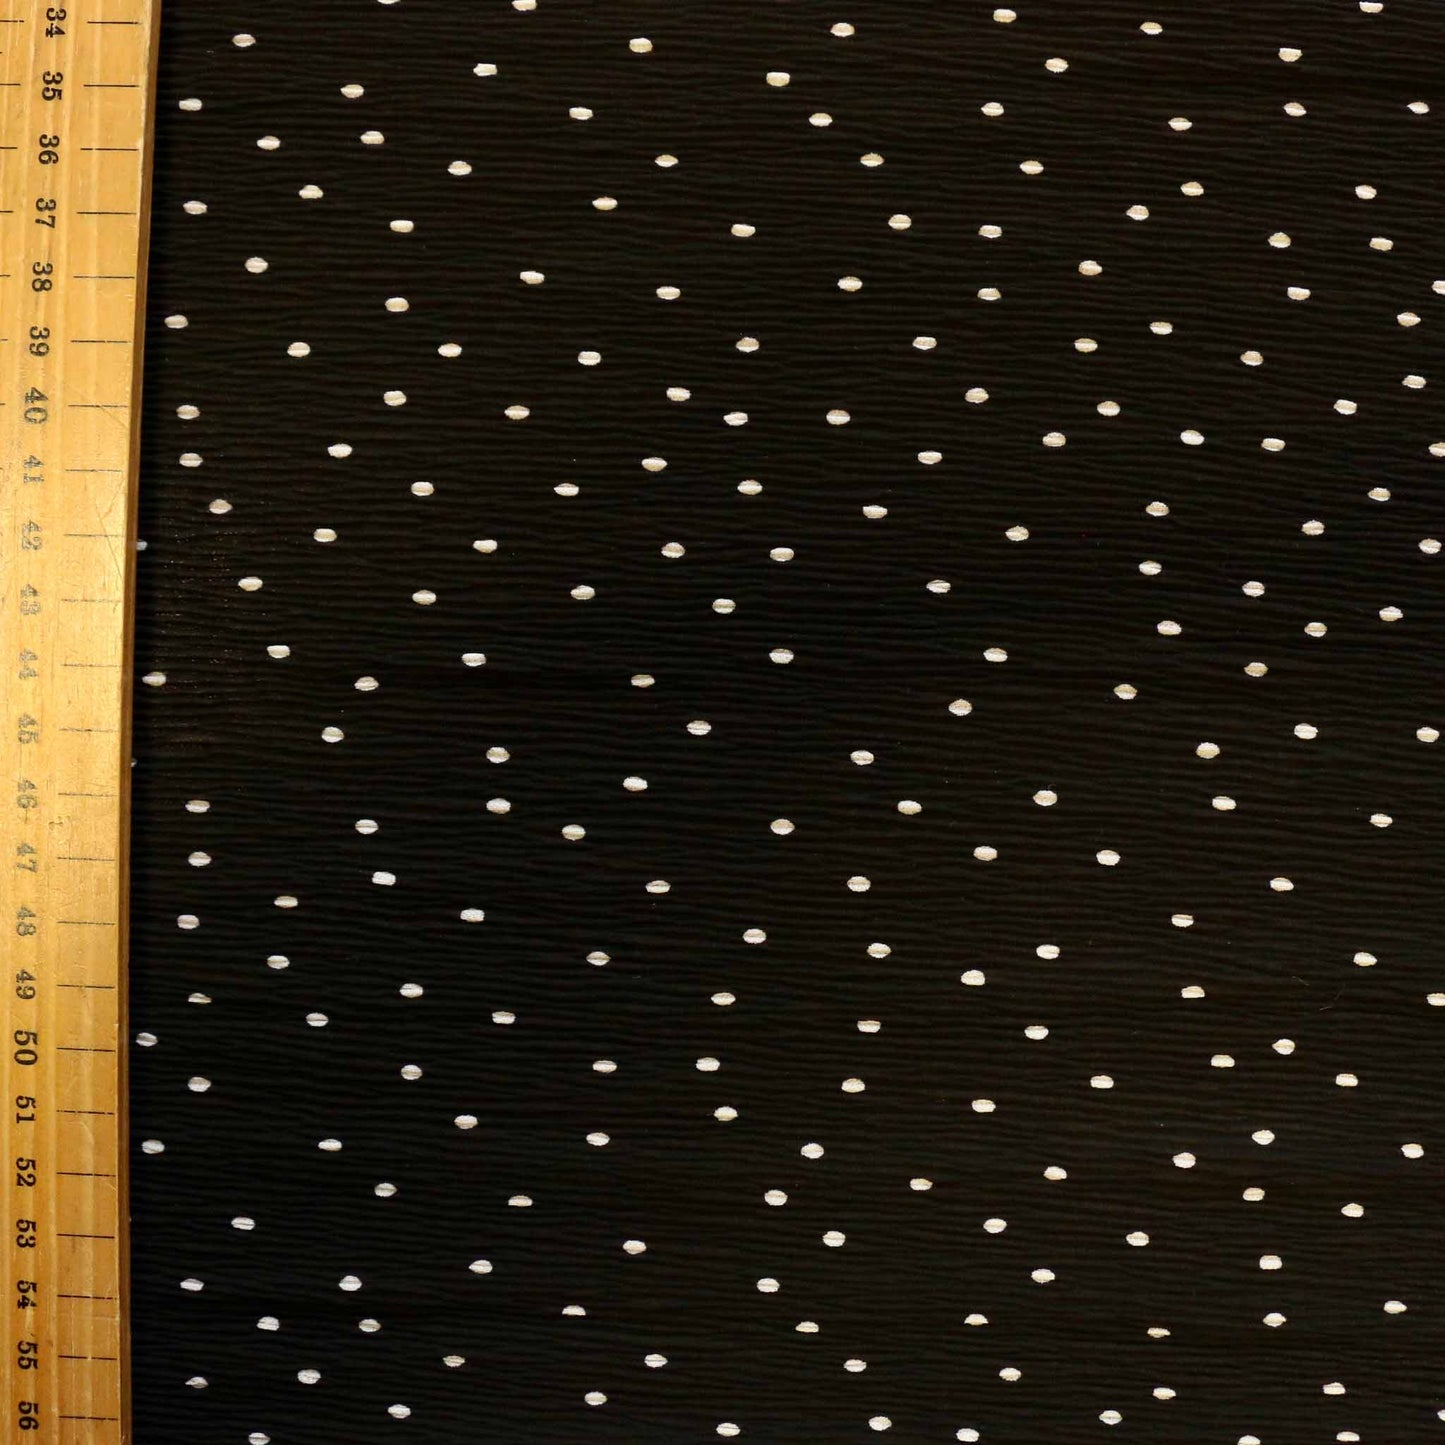 metre dressmaking georgette fabric in black with white polka dots